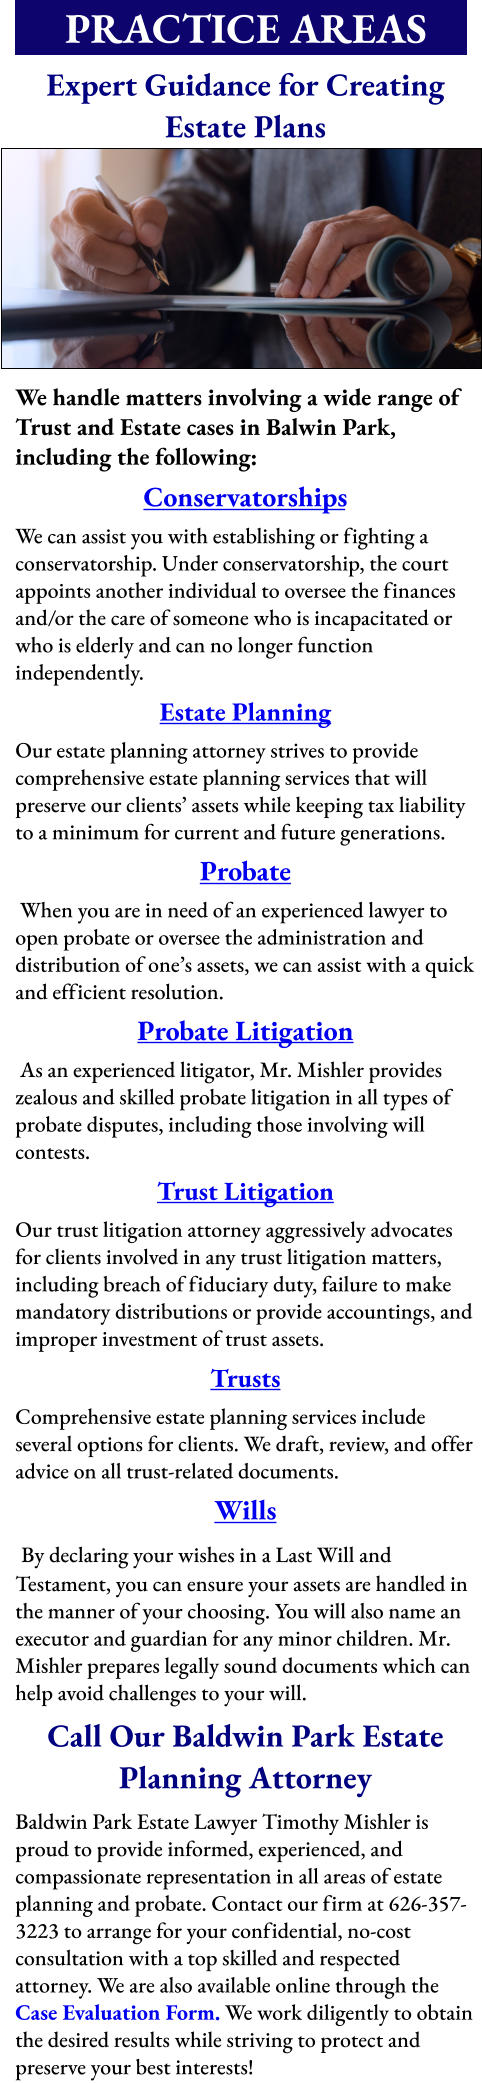 PRACTICE AREAS      Expert Guidance for Creating Estate Plans          We handle matters involving a wide range of Trust and Estate cases in Balwin Park, including the following: Conservatorships We can assist you with establishing or fighting a conservatorship. Under conservatorship, the court appoints another individual to oversee the finances and/or the care of someone who is incapacitated or who is elderly and can no longer function independently. Estate Planning  Our estate planning attorney strives to provide comprehensive estate planning services that will preserve our clients’ assets while keeping tax liability to a minimum for current and future generations. Probate  When you are in need of an experienced lawyer to open probate or oversee the administration and distribution of one’s assets, we can assist with a quick and efficient resolution. Probate Litigation  As an experienced litigator, Mr. Mishler provides zealous and skilled probate litigation in all types of probate disputes, including those involving will contests.   Trust Litigation  Our trust litigation attorney aggressively advocates for clients involved in any trust litigation matters, including breach of fiduciary duty, failure to make mandatory distributions or provide accountings, and improper investment of trust assets. Trusts  Comprehensive estate planning services include several options for clients. We draft, review, and offer advice on all trust-related documents.  Wills  By declaring your wishes in a Last Will and Testament, you can ensure your assets are handled in the manner of your choosing. You will also name an executor and guardian for any minor children. Mr. Mishler prepares legally sound documents which can help avoid challenges to your will. Call Our Baldwin Park Estate Planning Attorney Baldwin Park Estate Lawyer Timothy Mishler is proud to provide informed, experienced, and compassionate representation in all areas of estate planning and probate. Contact our firm at 626-357-3223 to arrange for your confidential, no-cost consultation with a top skilled and respected attorney. We are also available online through the Case Evaluation Form. We work diligently to obtain the desired results while striving to protect and preserve your best interests!